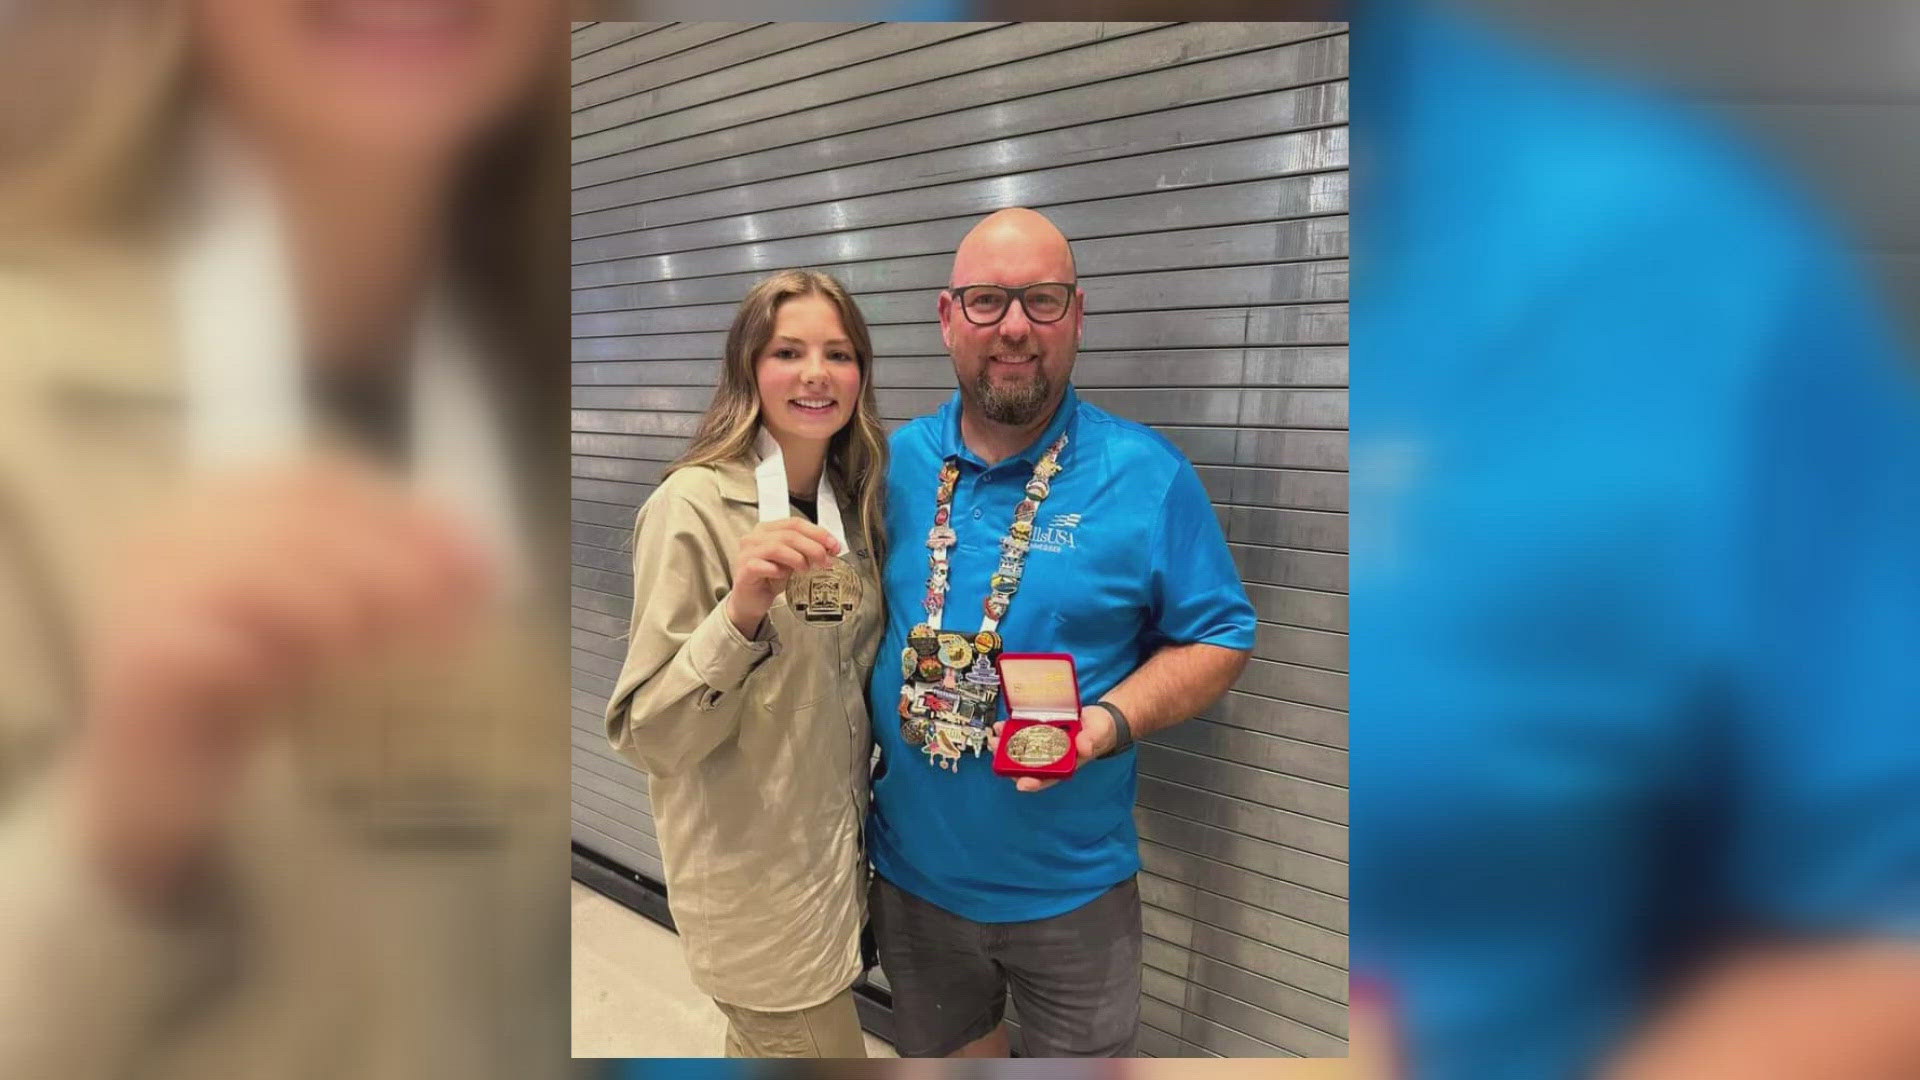 Lilly Dunn competed in the national SkillsUSA welding contest in Atlanta, beating out 44 other high school students or recent high school graduates.